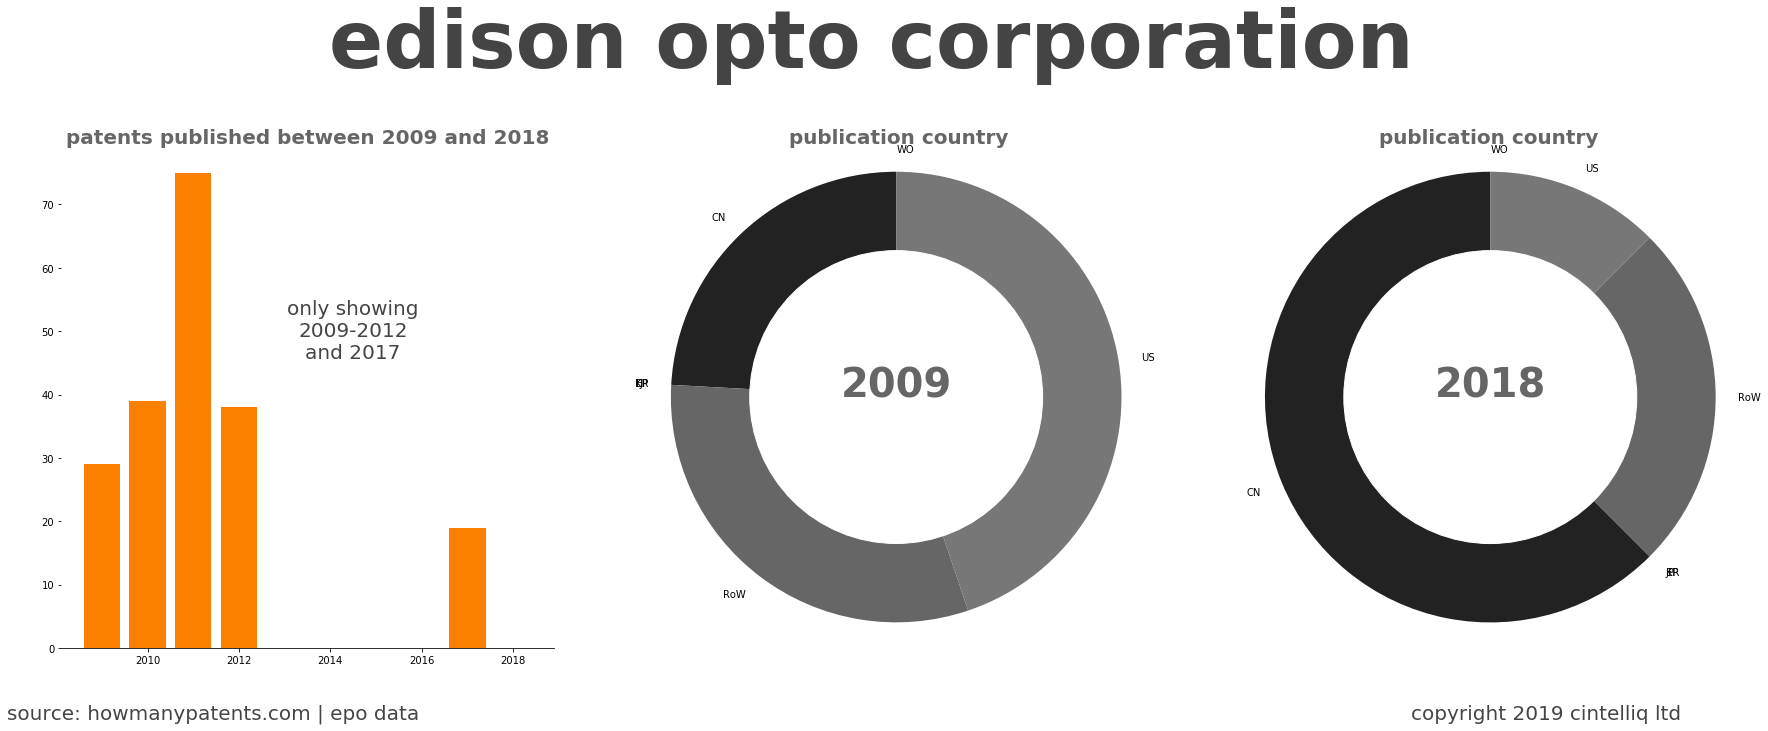 summary of patents for Edison Opto Corporation